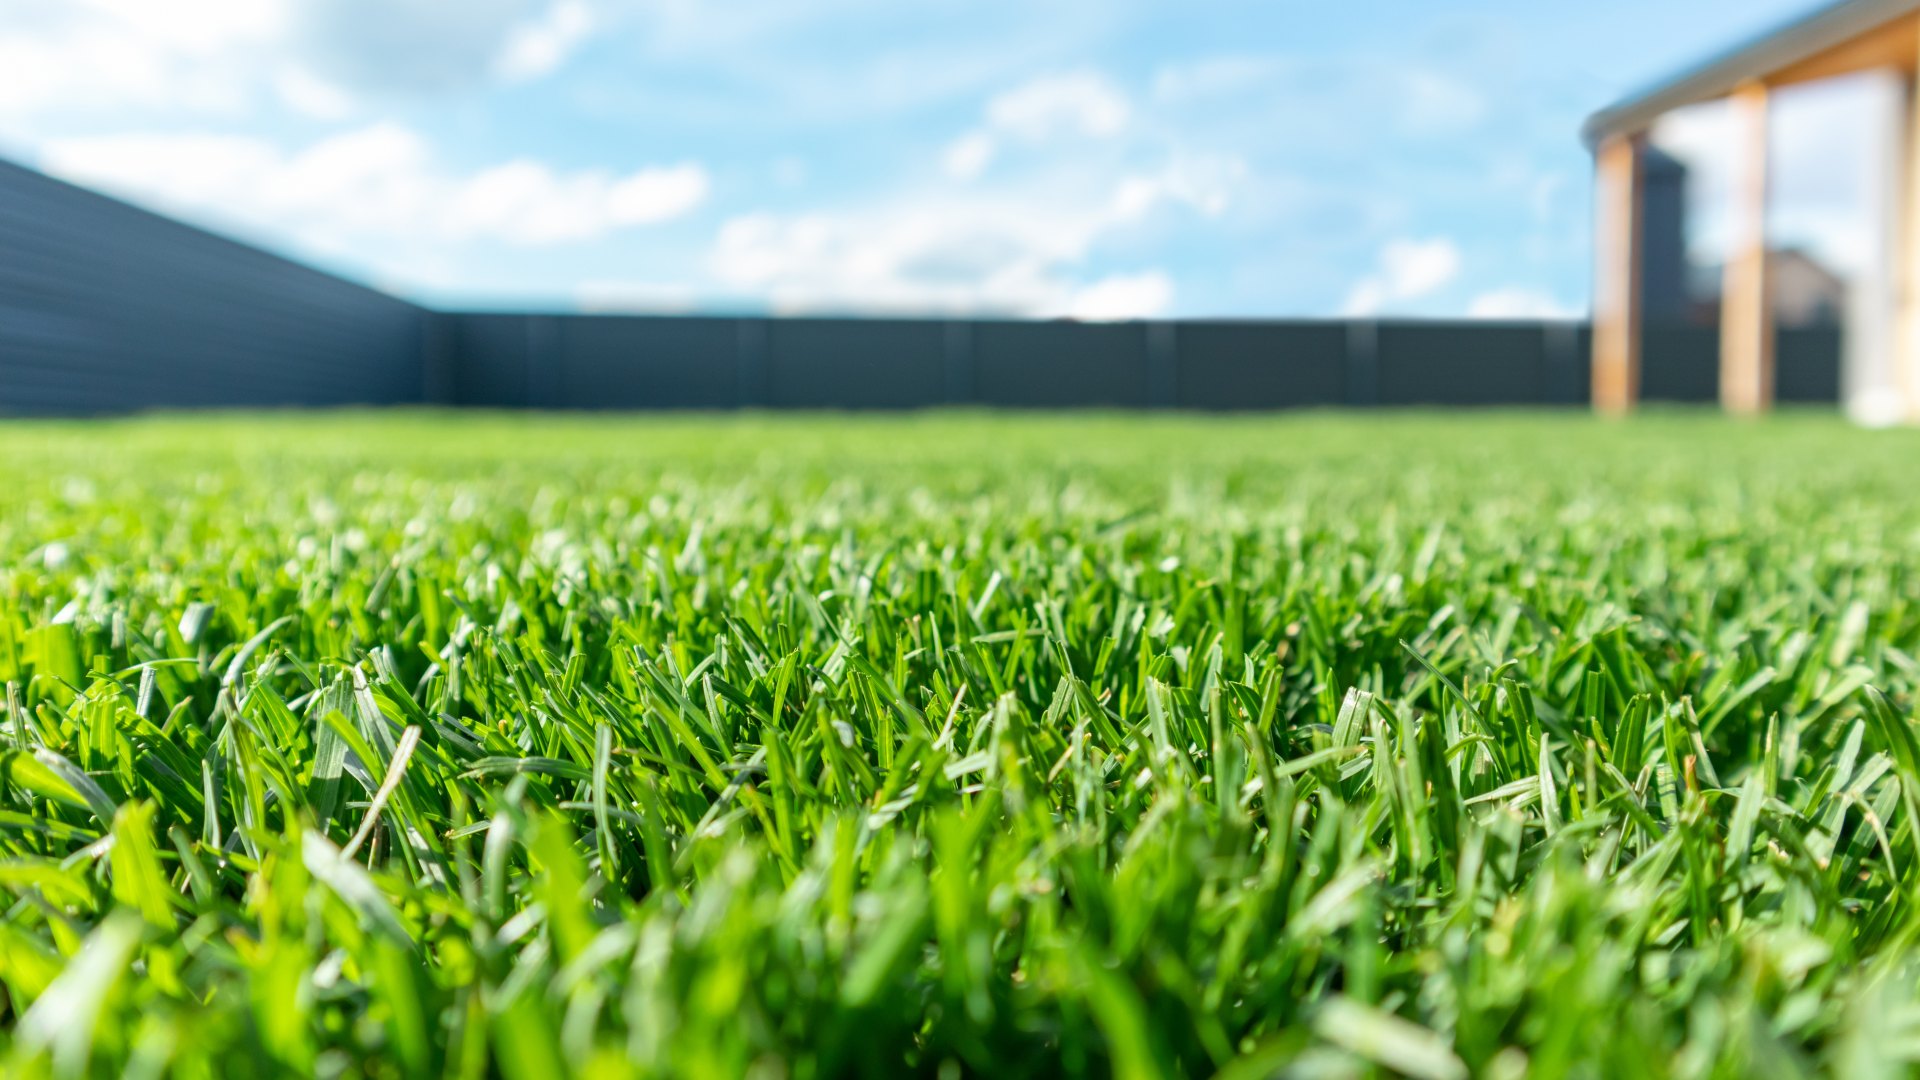 How to Choose Between Sod & Seed for Your New Lawn